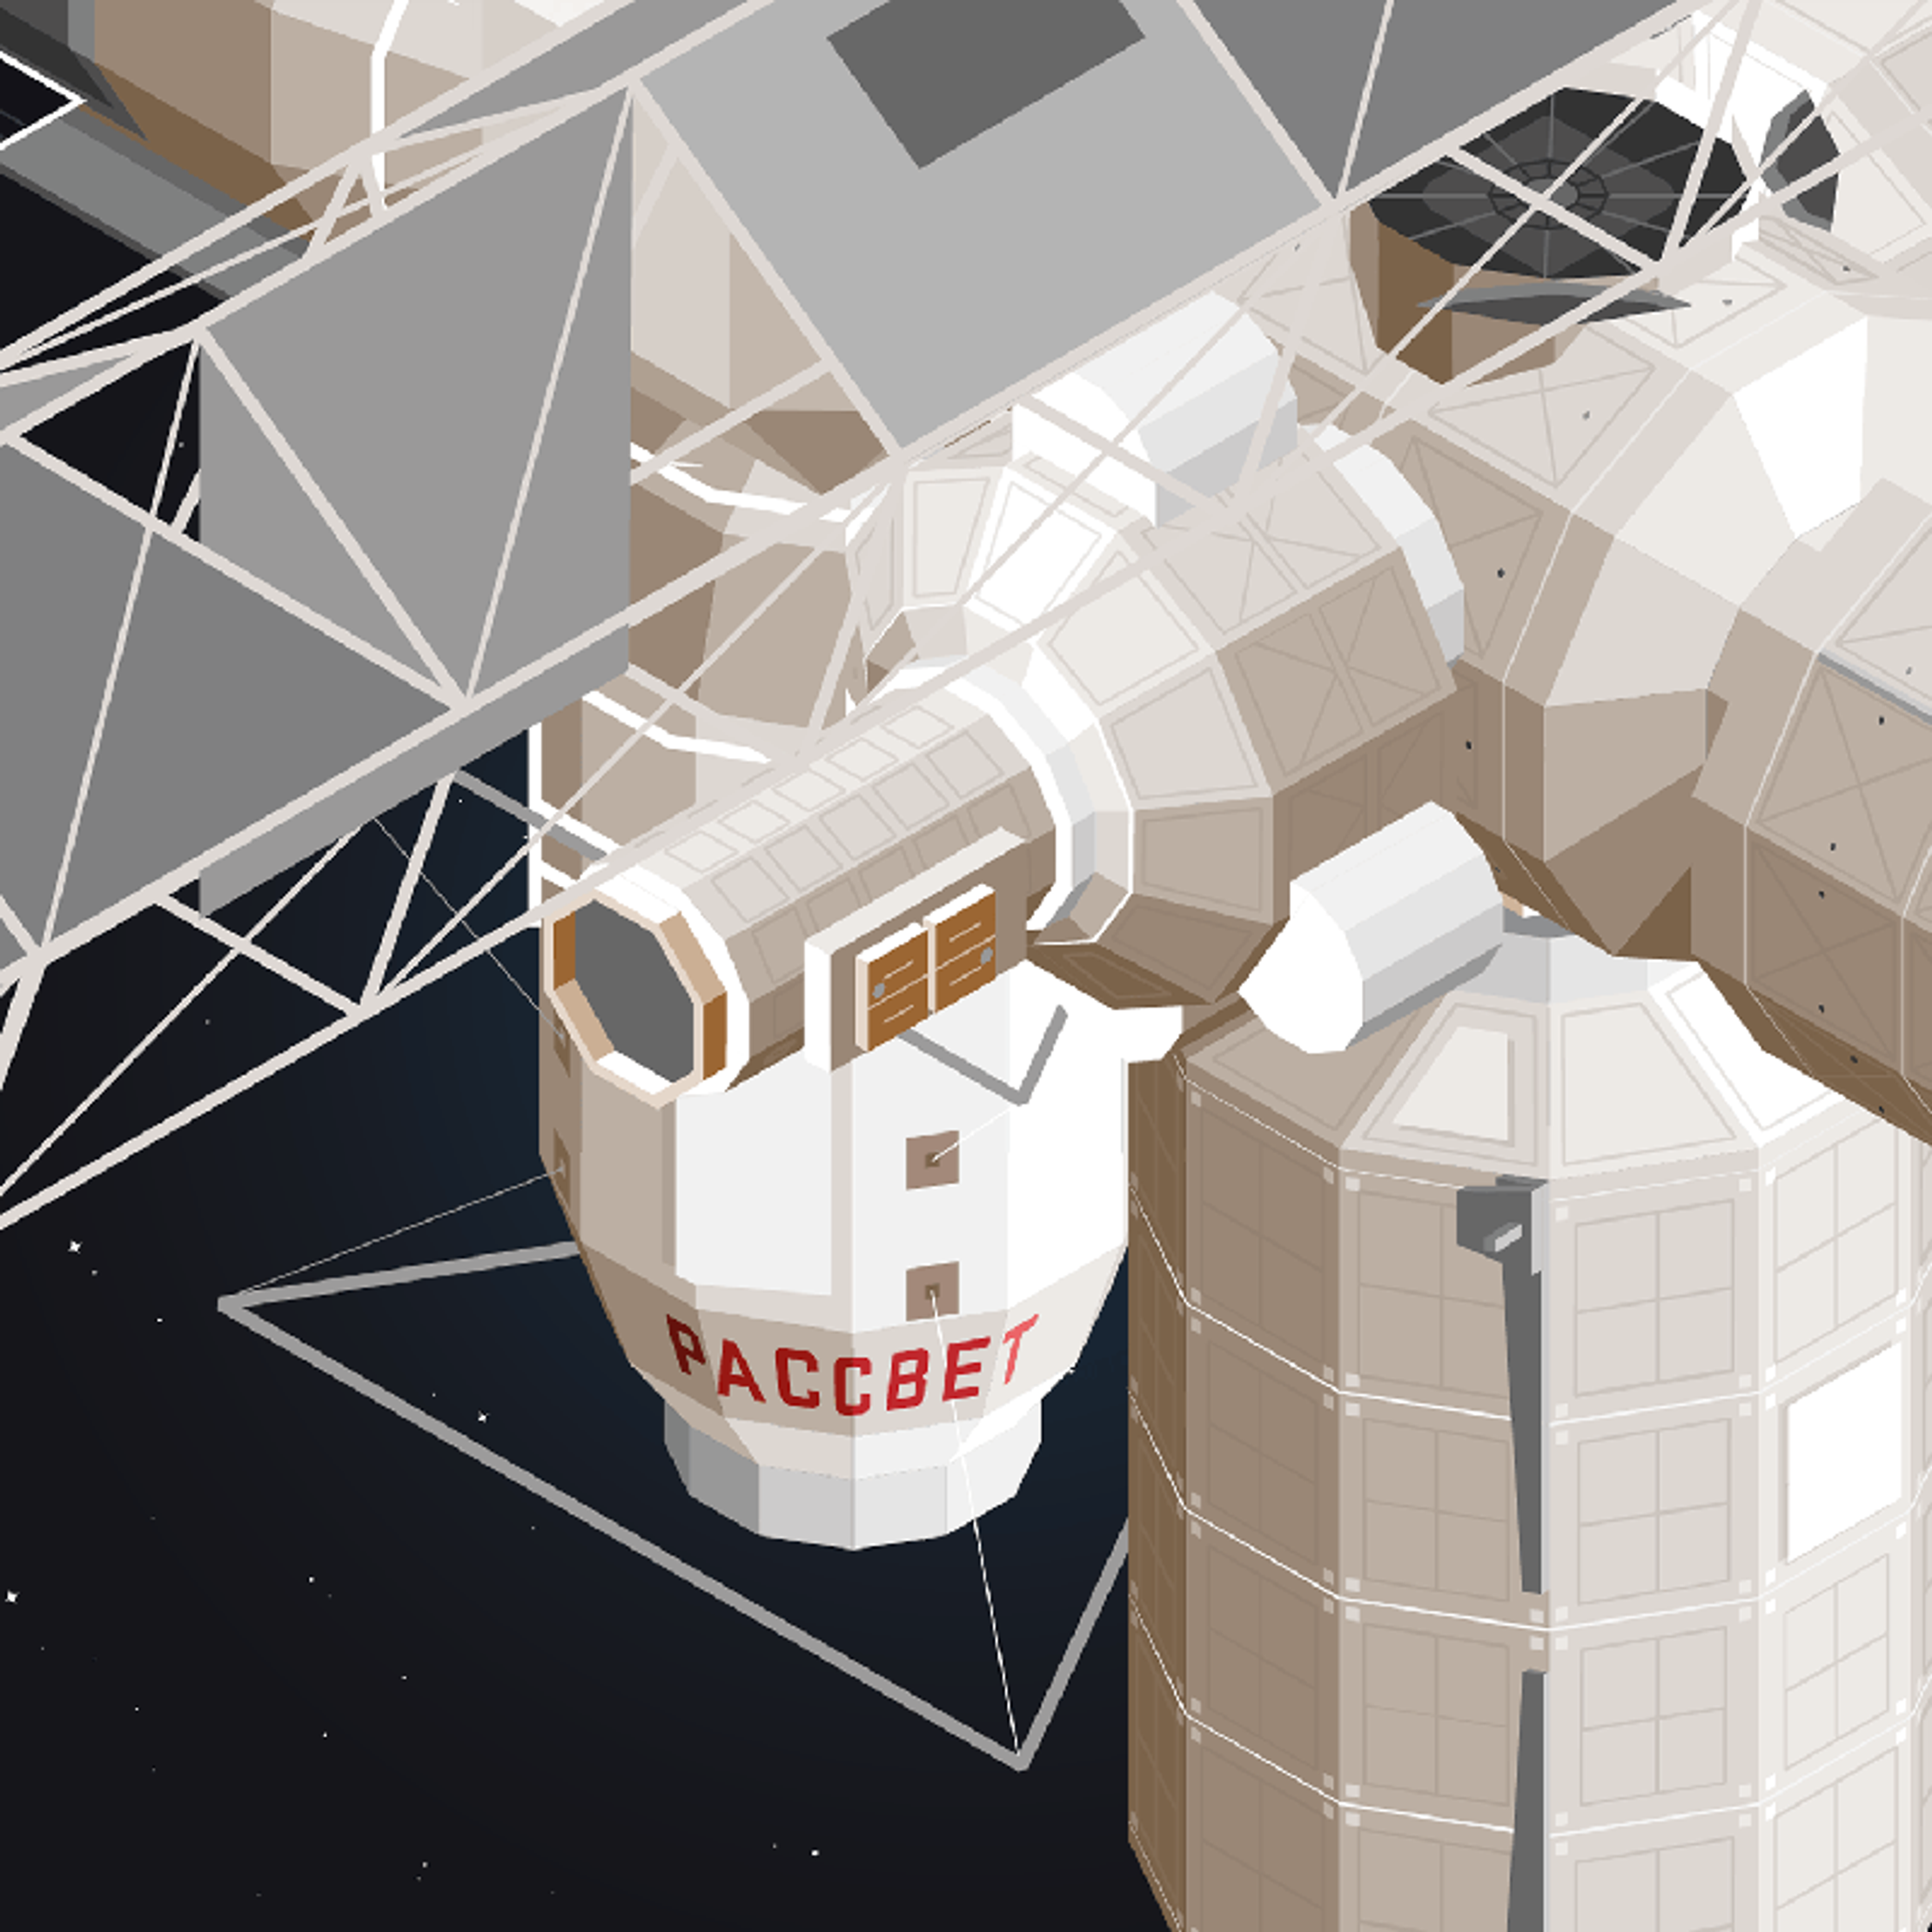 A low-poly illustration of a module of the international space station in space.